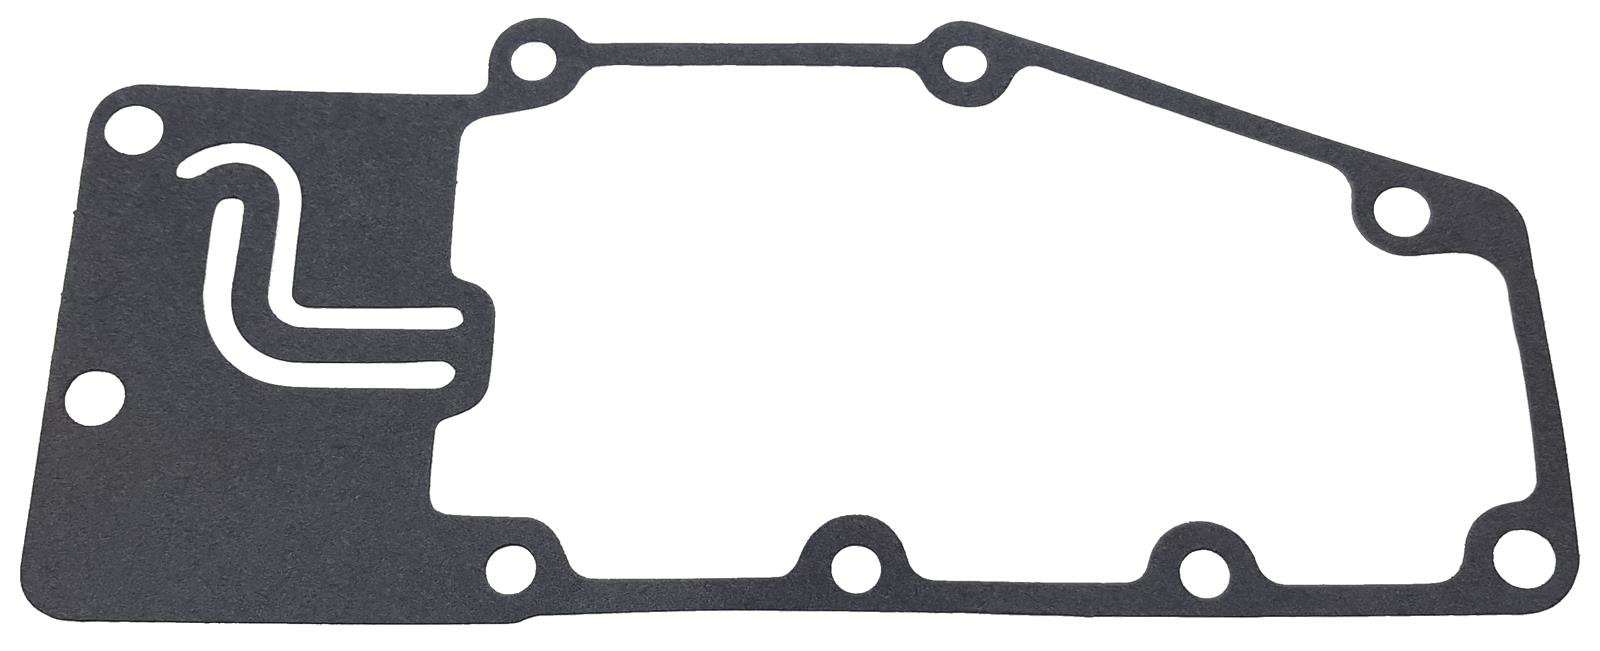 ZF4HP14 - 18 Gasket Filter Cover